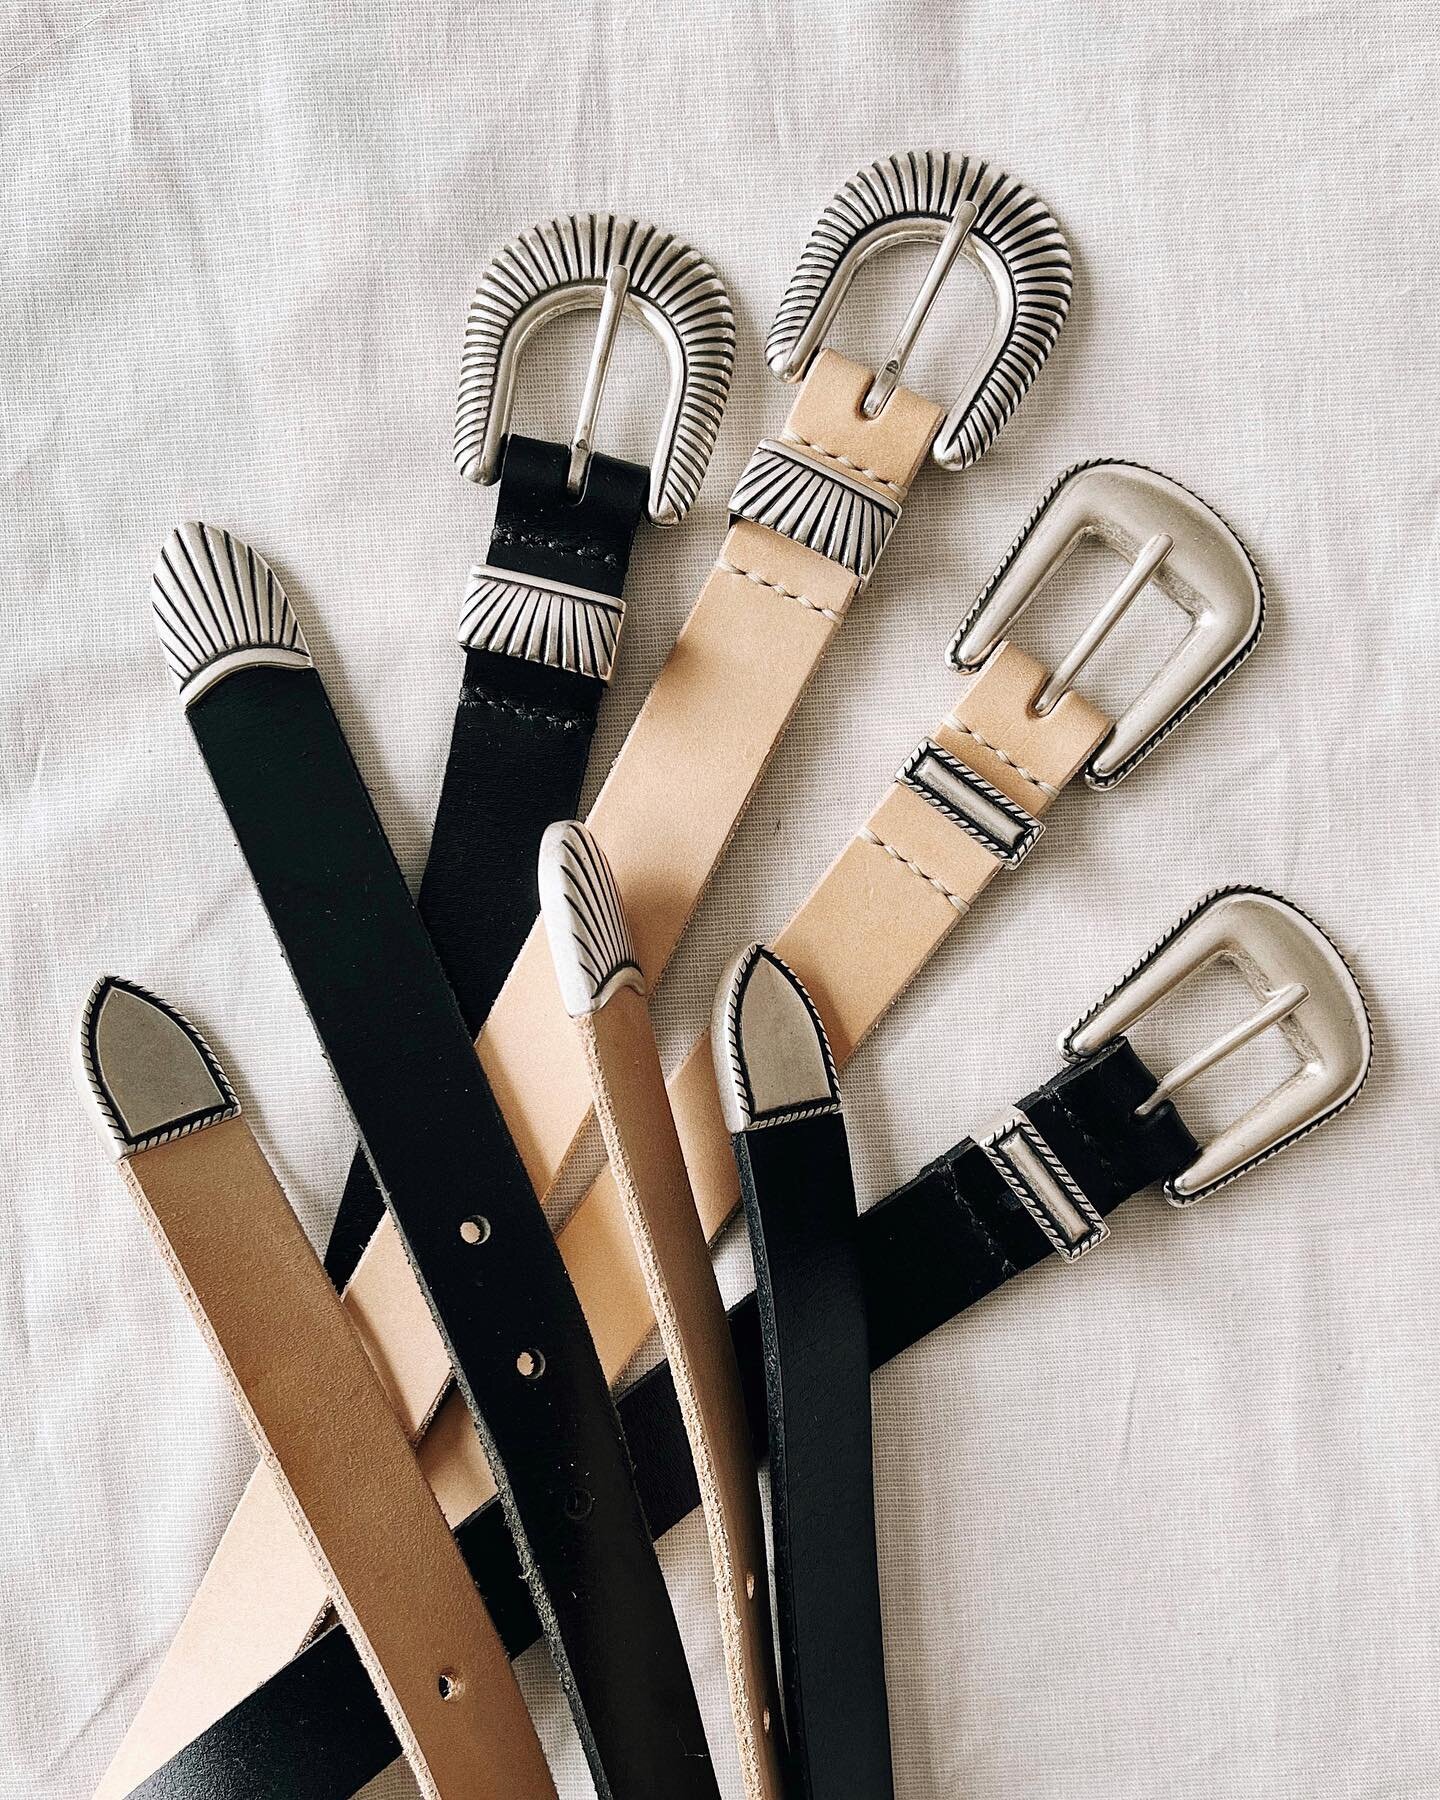 Western belts in black and unfinished natural leather, that will darken with time and regular use. Hardware is solid brass in &lsquo;English Silver&rsquo; finish, made in Italy. Available soon in limited quantities.